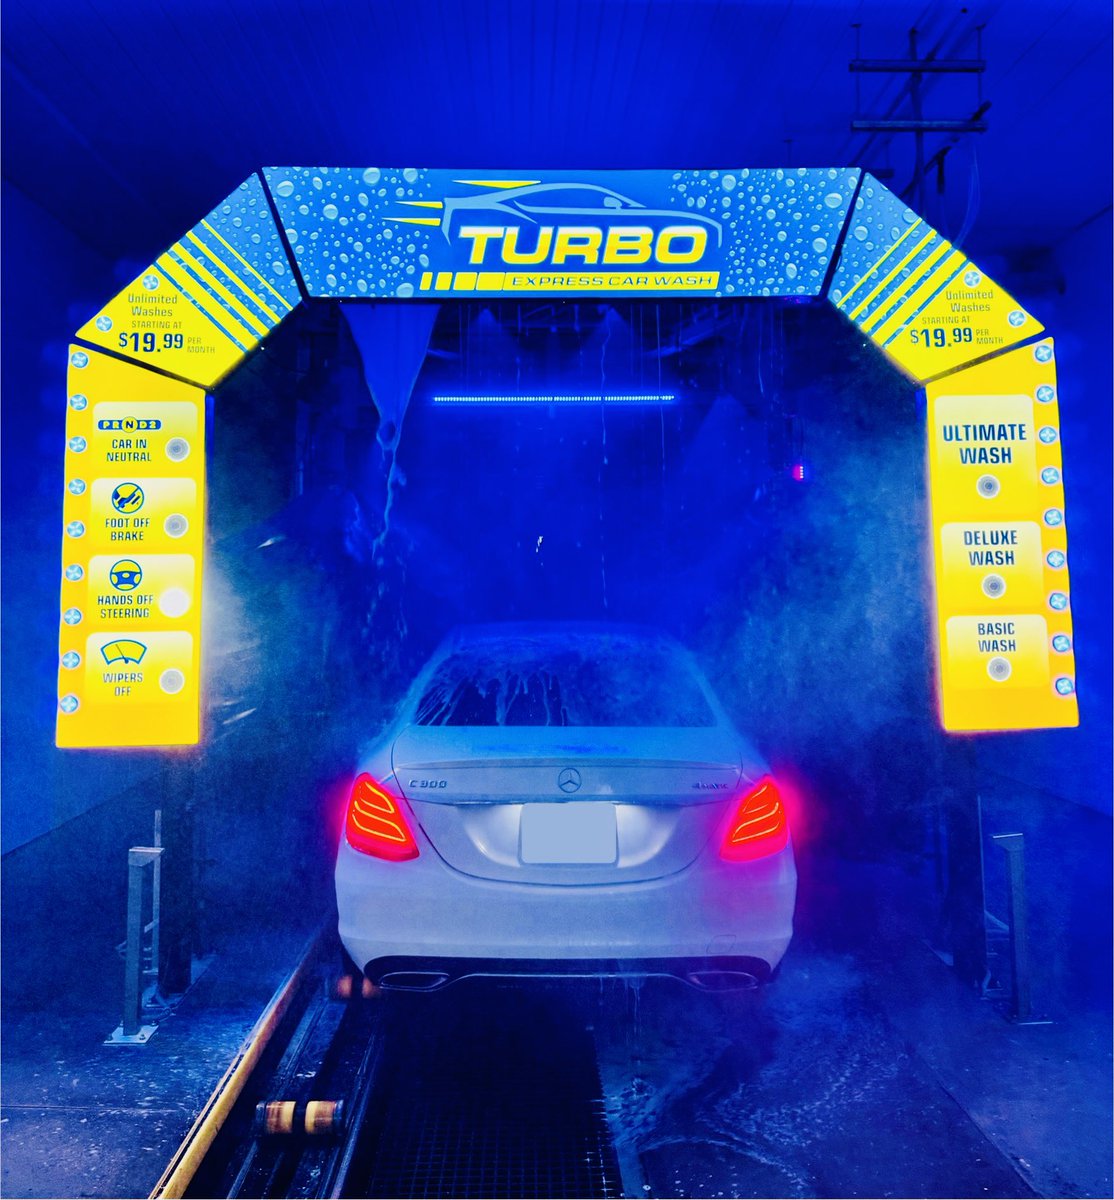 Ready to level up your car wash game? Stop by our high-tech facility where every wash feels like a journey into the future of clean! 💫 #NextGenClean #FreshWash #CarWash #CleanCars #ShinyCars #TurboExpressCarWash #ModernCarWash #RevolutionizeYourRide #CuttingEdgeClean